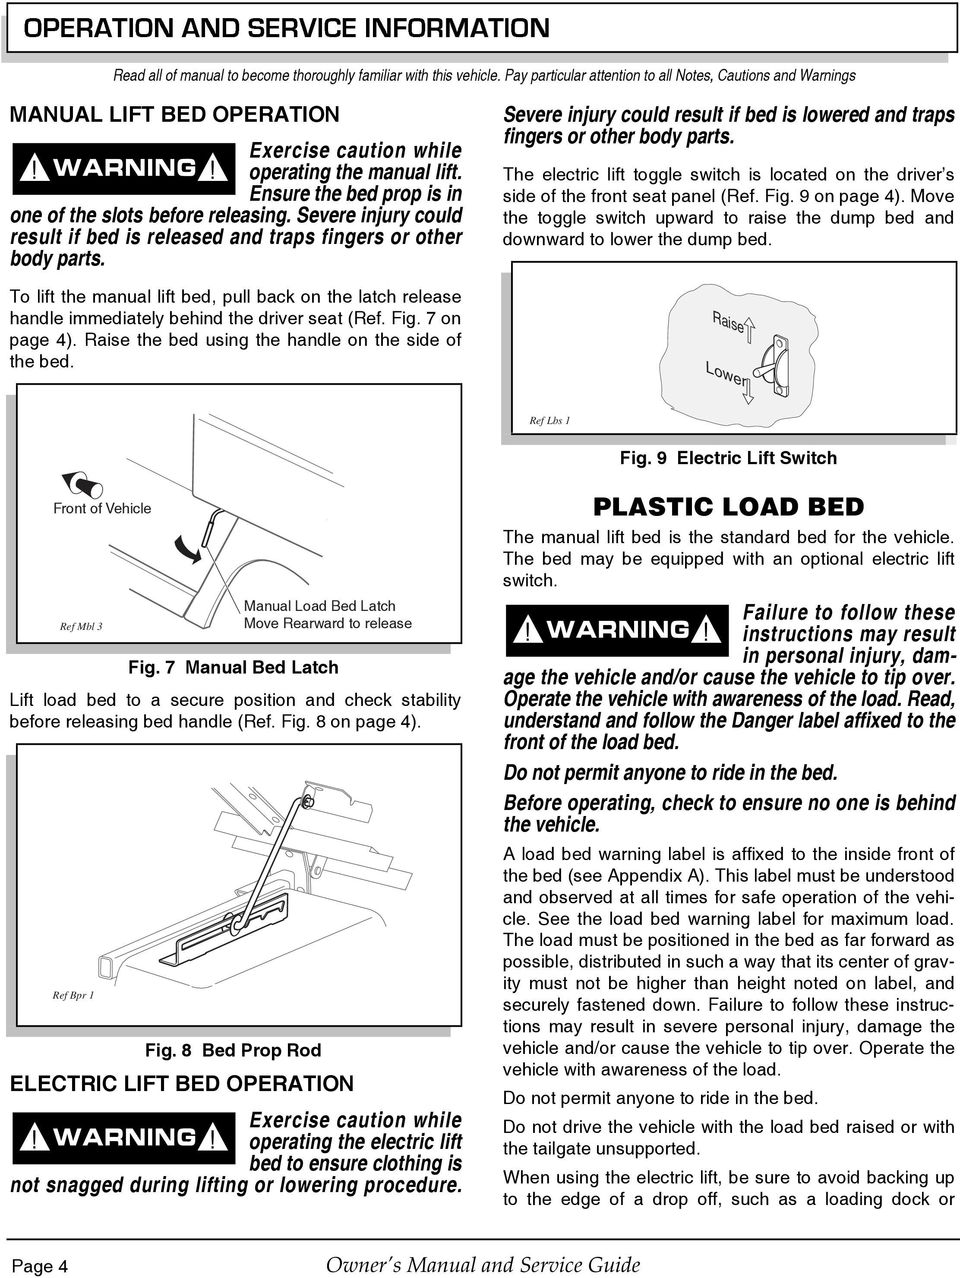 To lift the manual lift bed, pull back on the latch release handle immediately behind the driver seat (Ref. Fig. 7 on page 4). Raise the bed using the handle on the side of the bed.